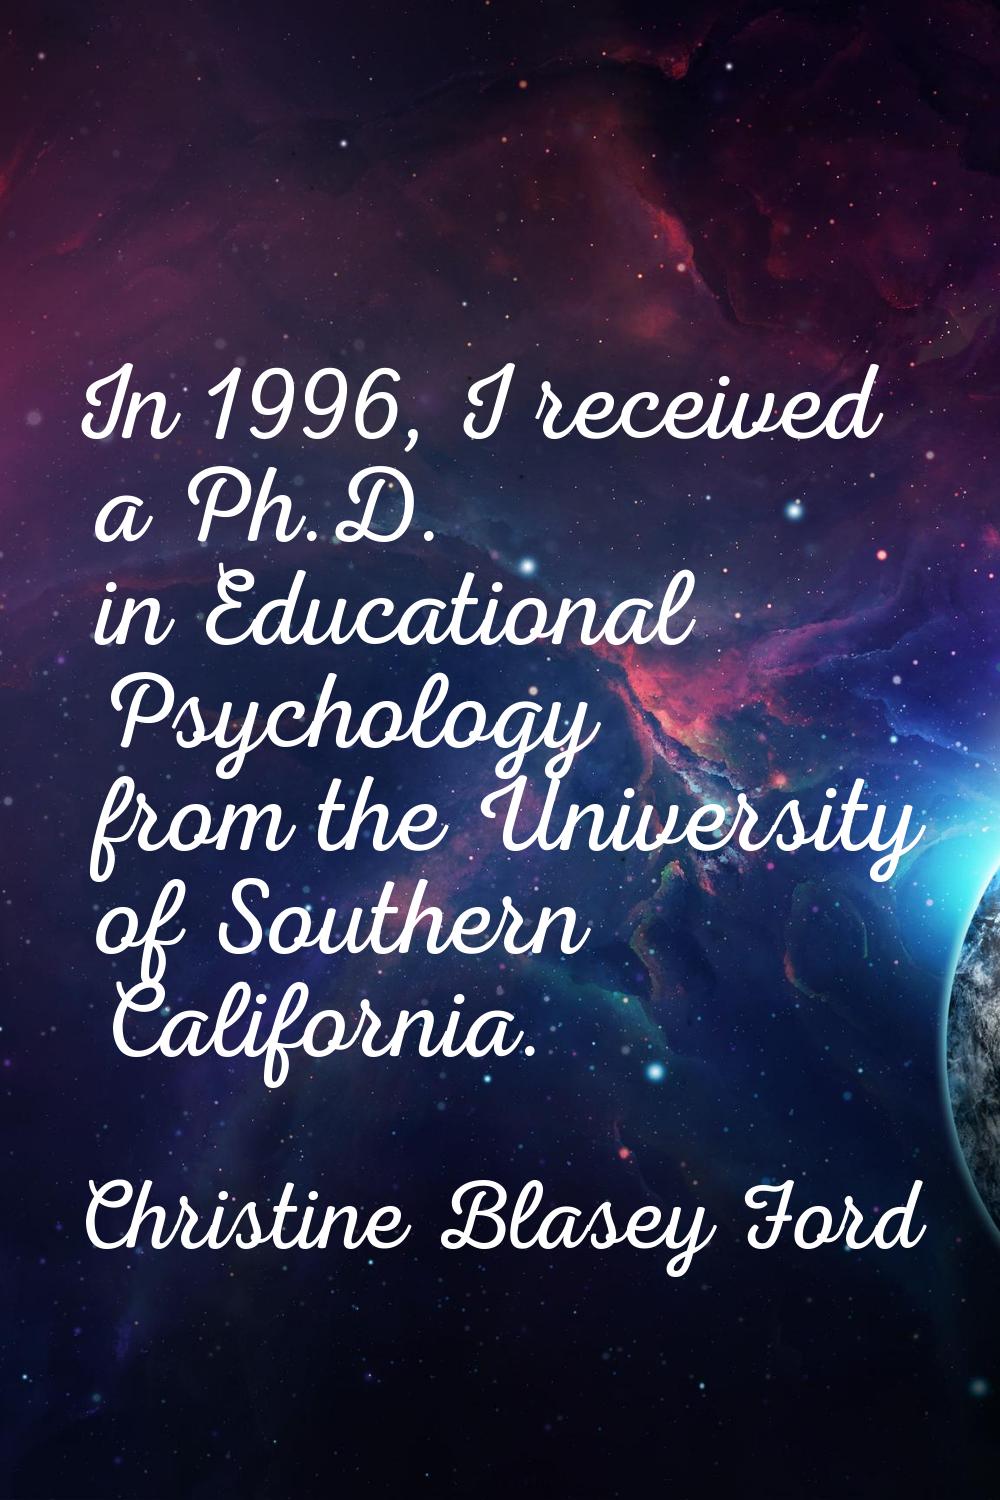 In 1996, I received a Ph.D. in Educational Psychology from the University of Southern California.